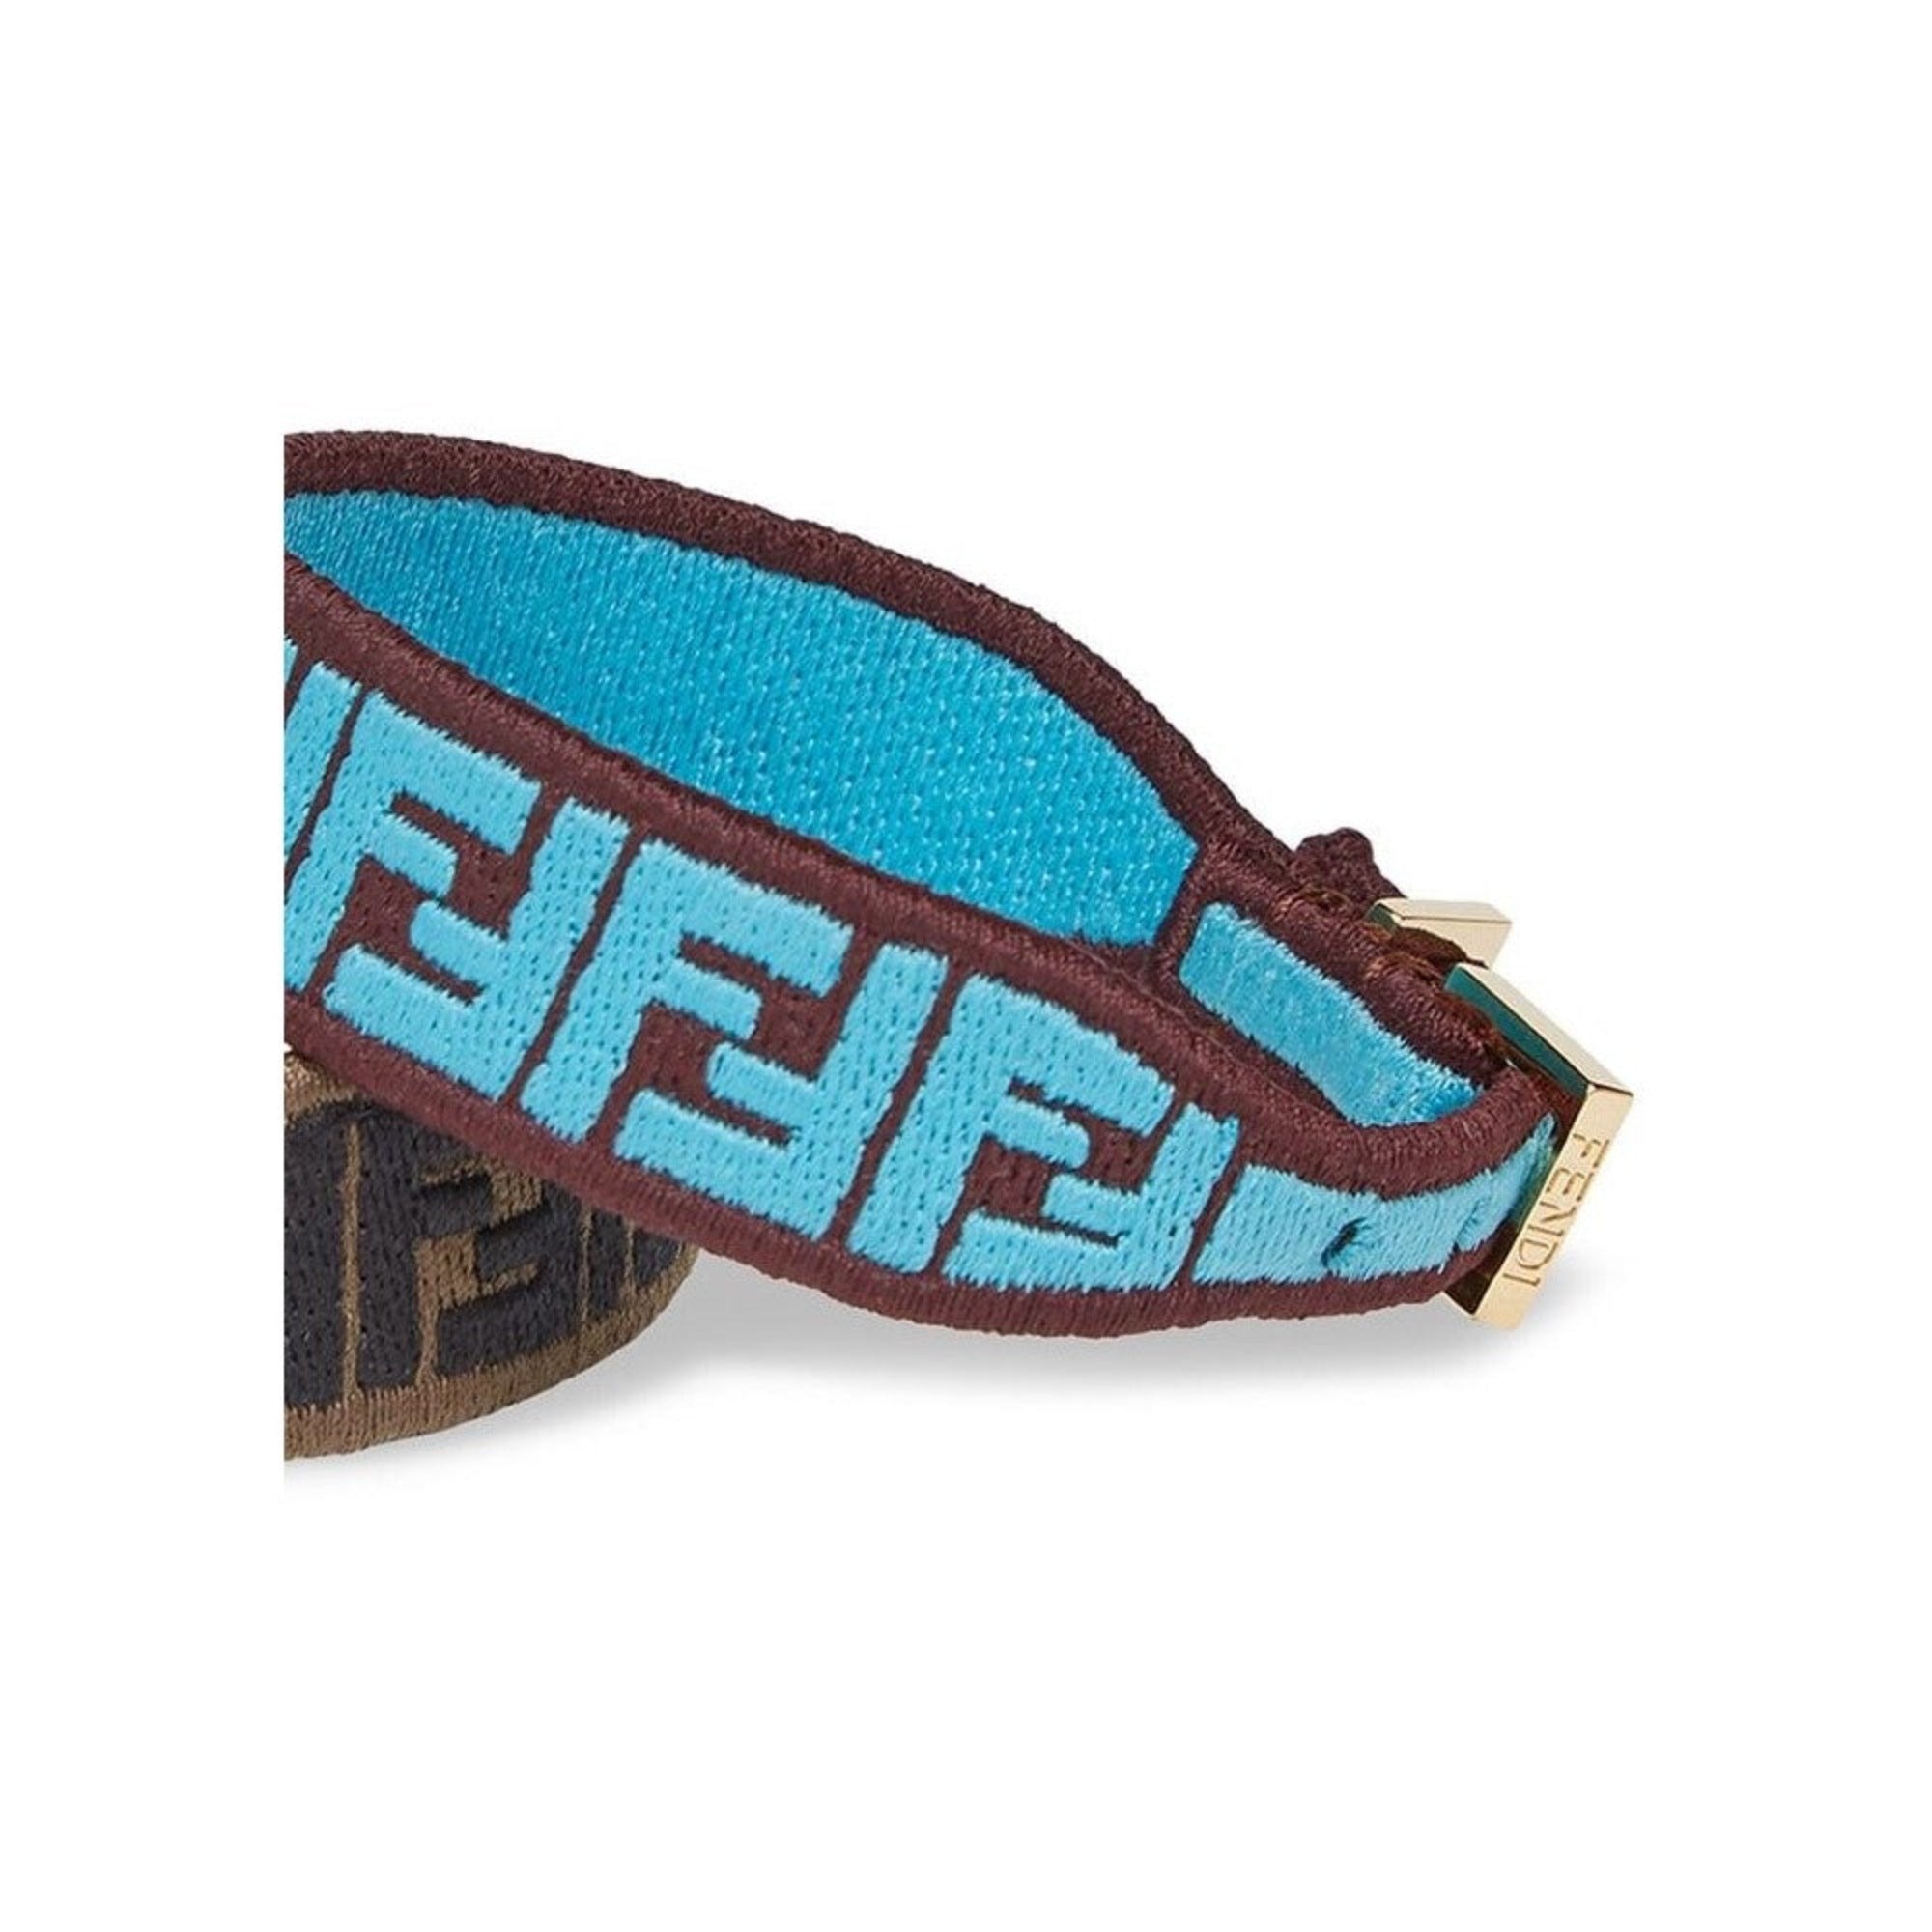 Fendi FF Embroidered Brown Cyber Blue Kit Bracelet 8AH256 at_Queen_Bee_of_Beverly_Hills